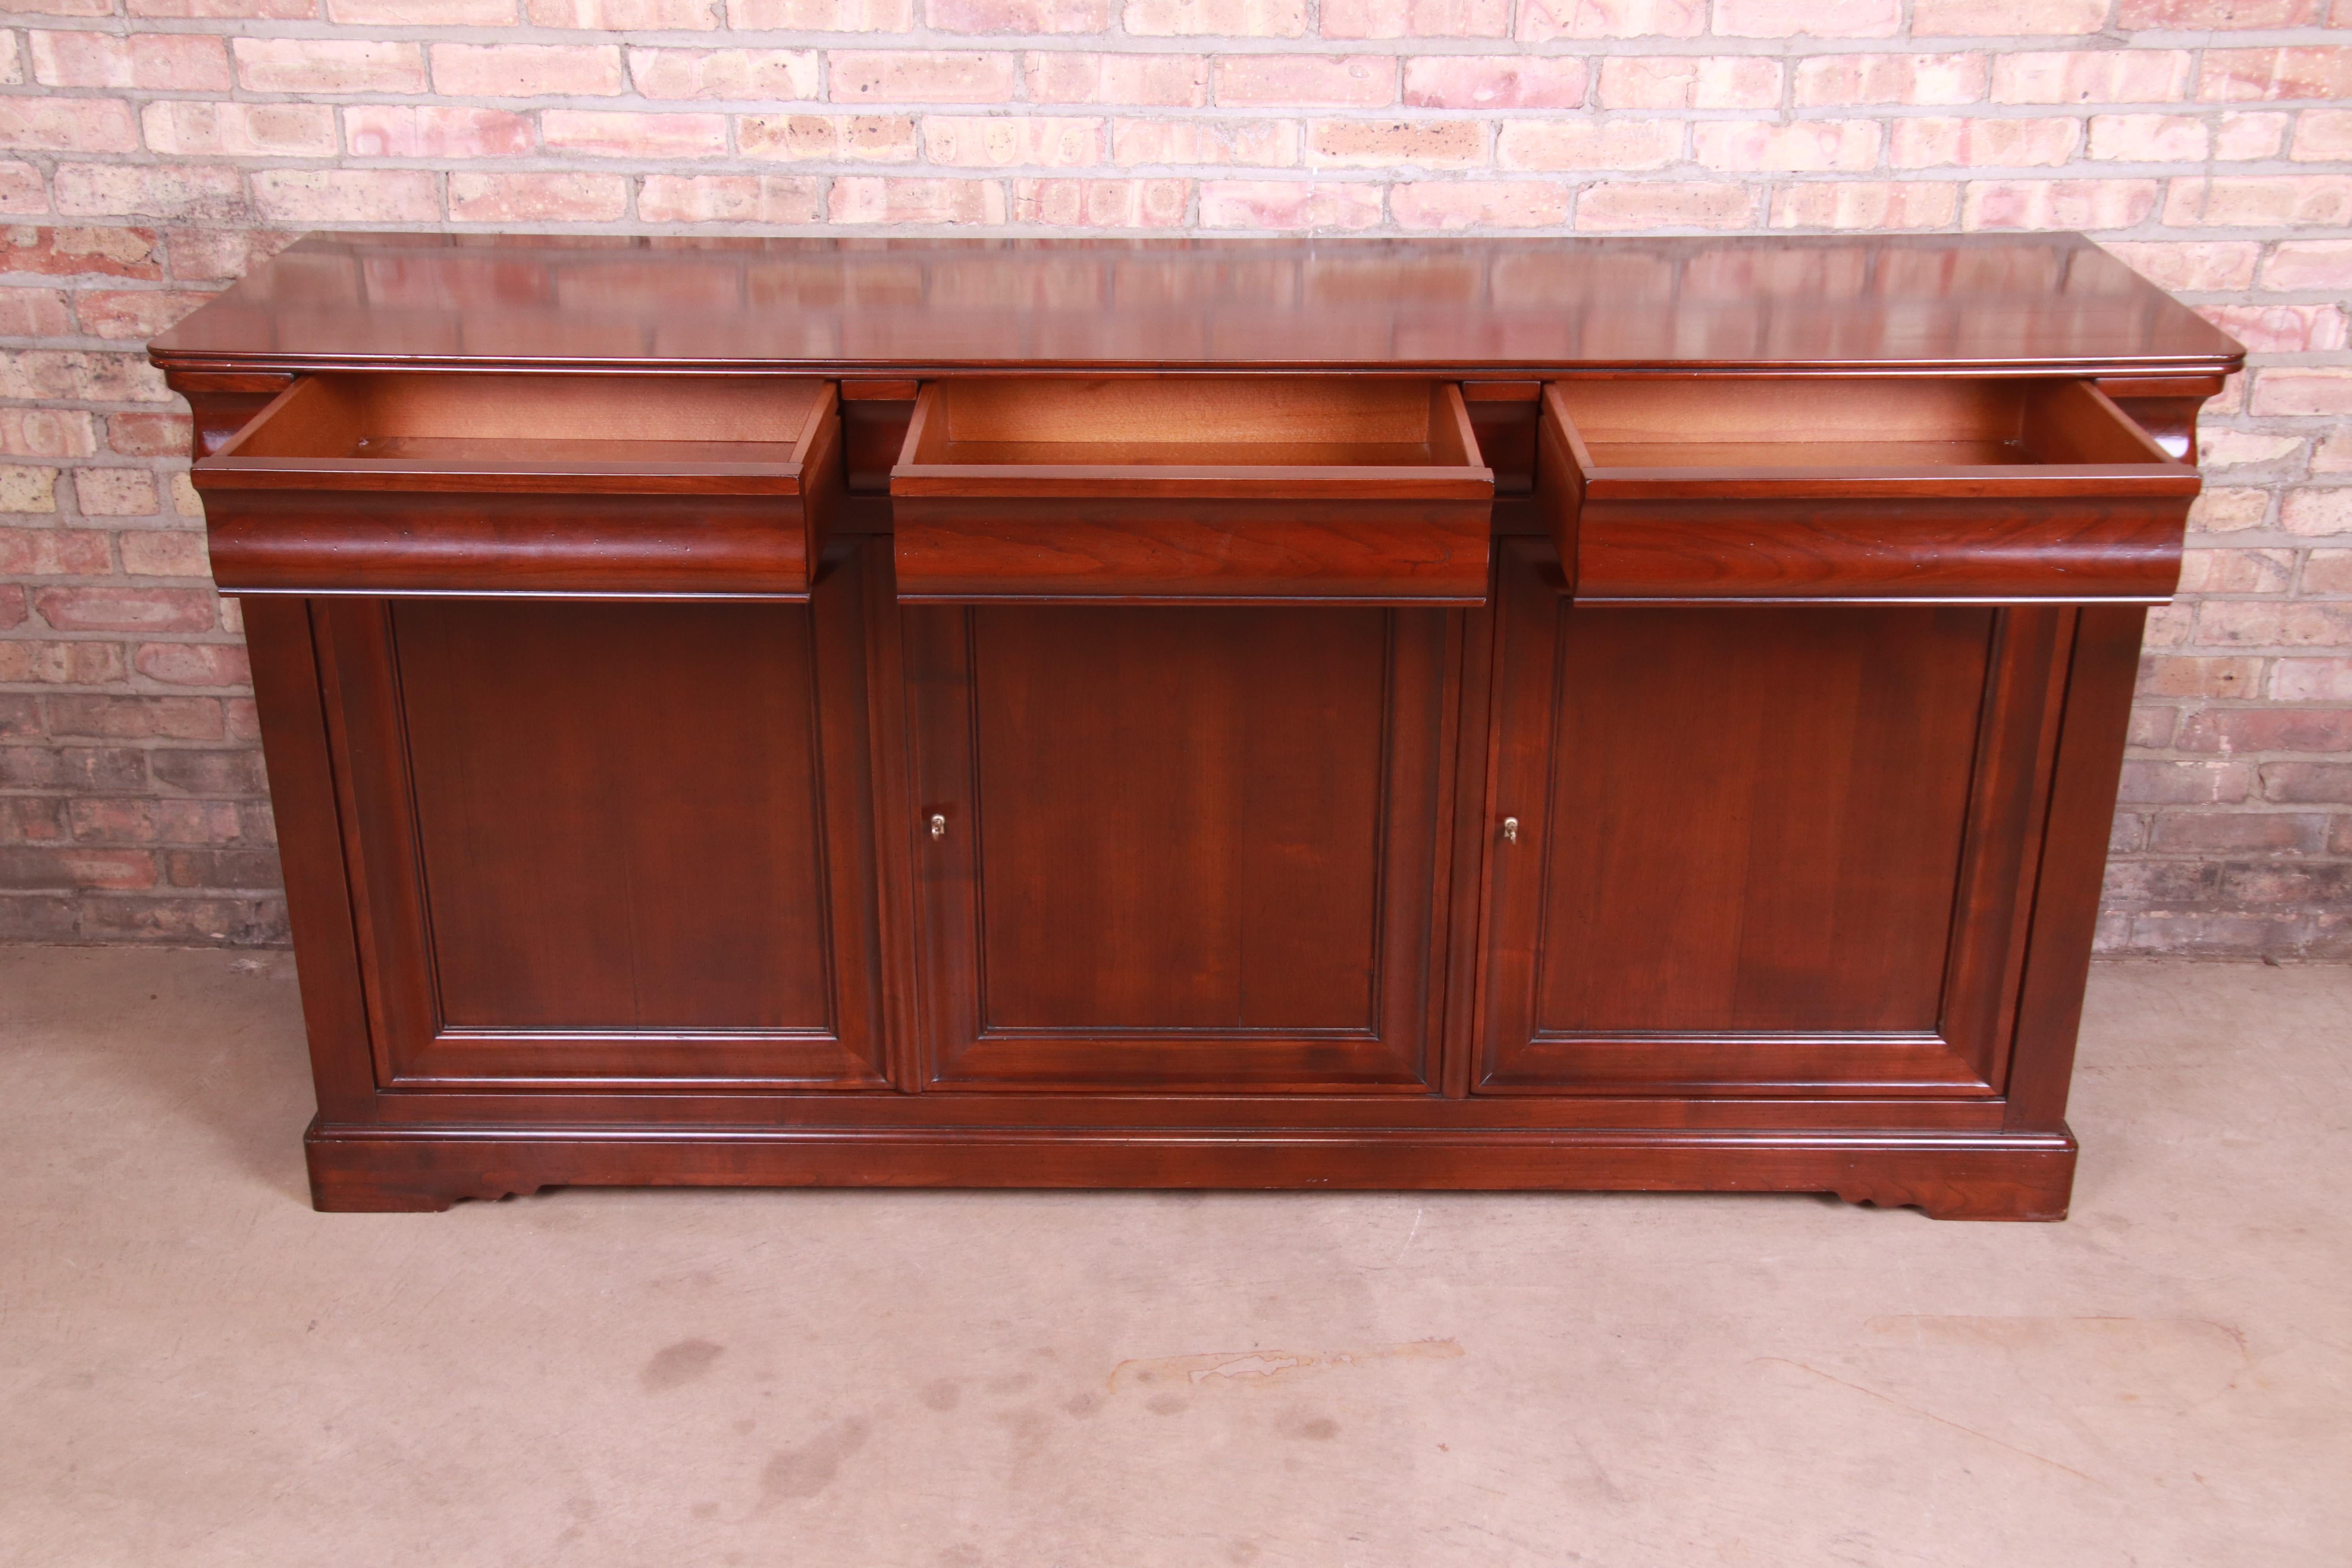 Grange French Provincial Cherry Wood Sideboard Credenza or Bar Cabinet 1